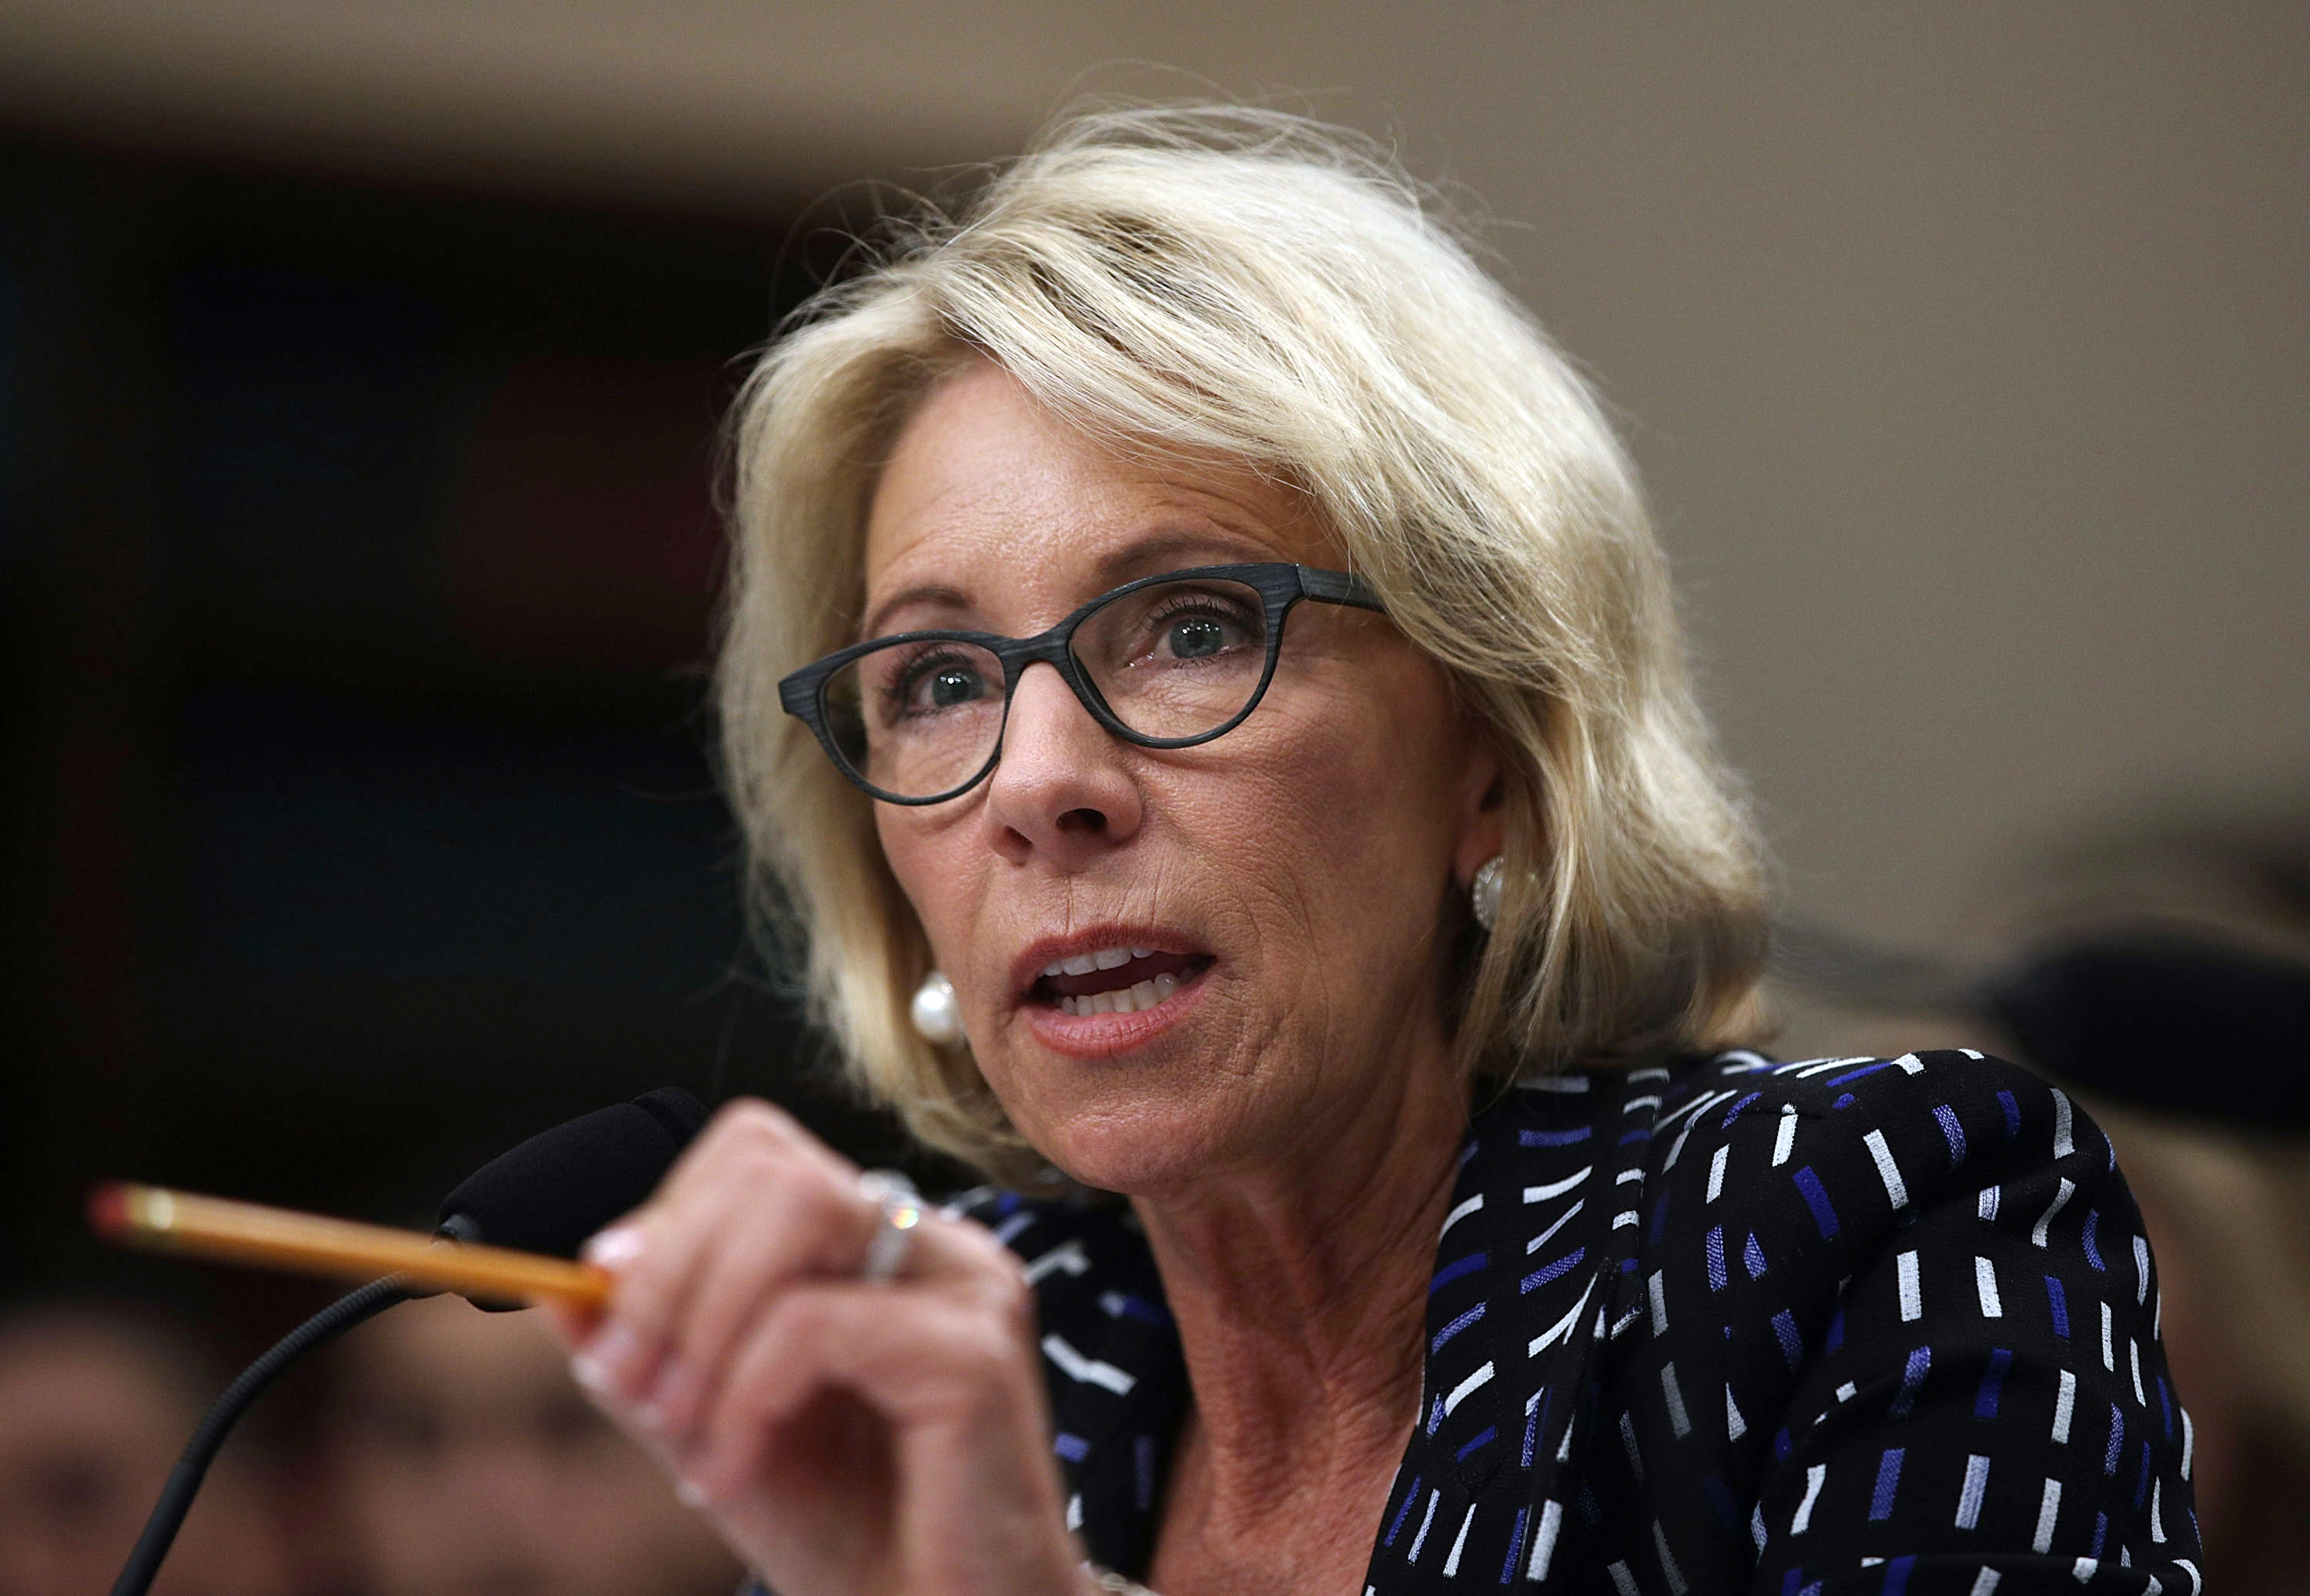 U.S. Secretary of Education Betsy DeVos testifies during a hearing before the Labor, Health and Human Services, Education and Related Agencies Subcommittee of the House Appropriations Committee on May 24, 2017, on Capitol Hill in Washington, DC. (Alex Wong—Getty Images)